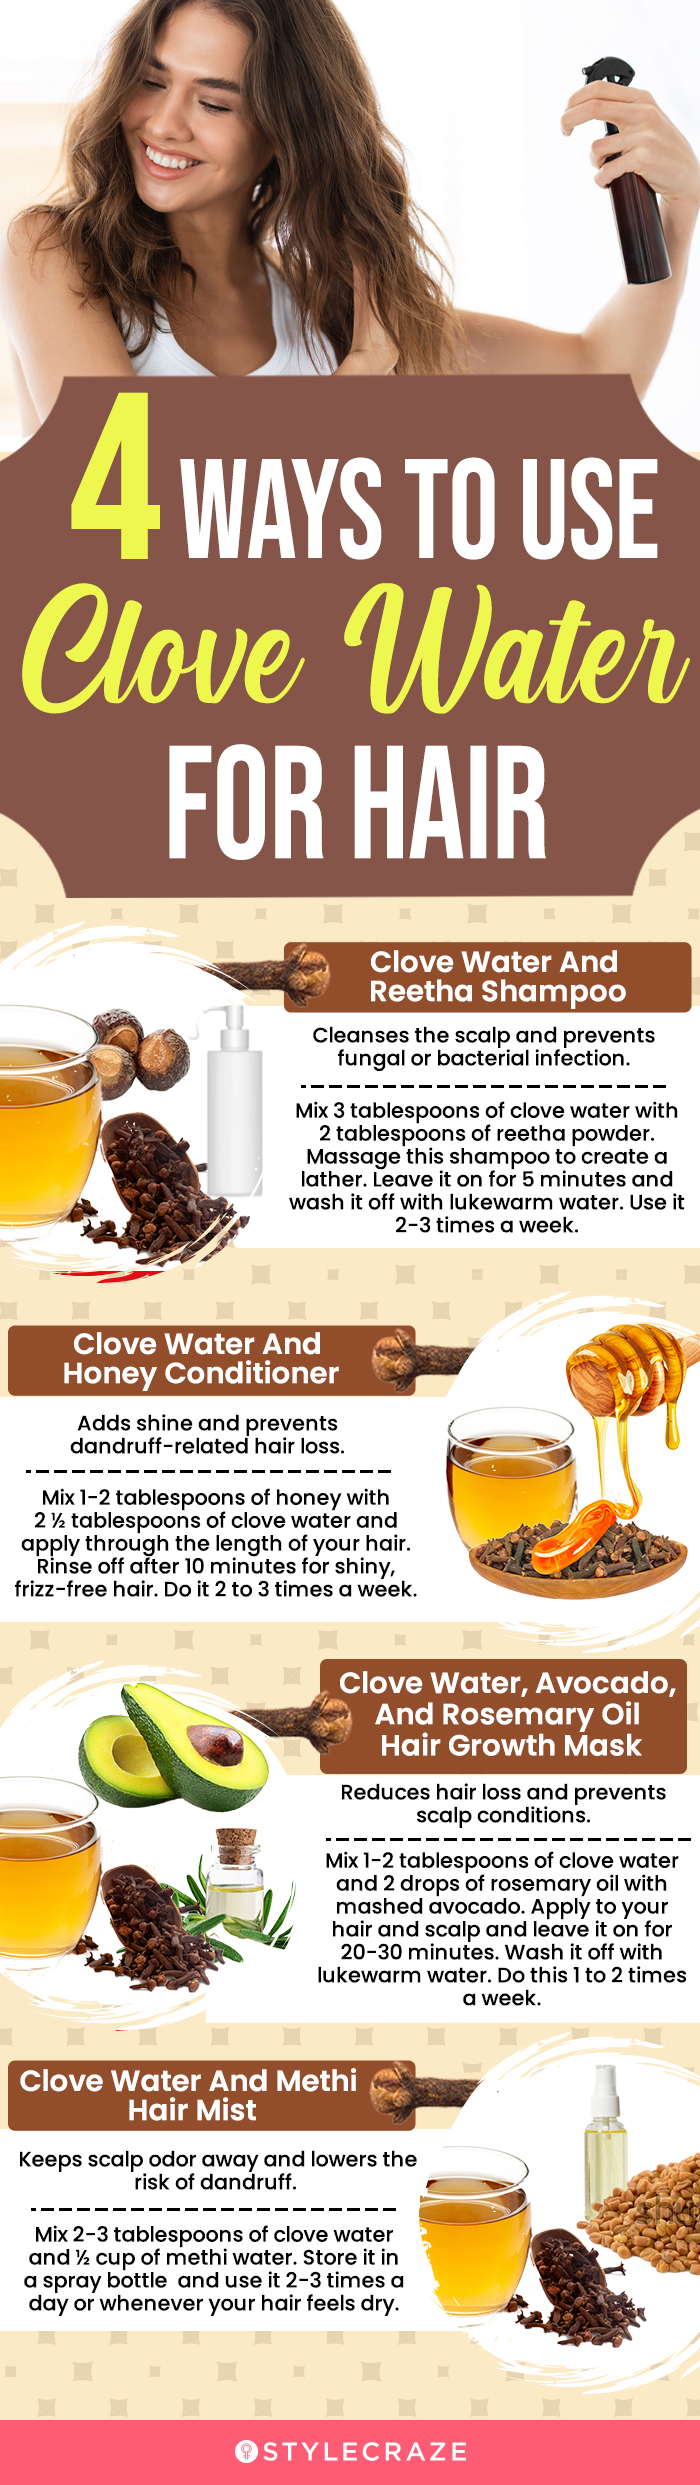 Clove And Rosemary Water for Hair  